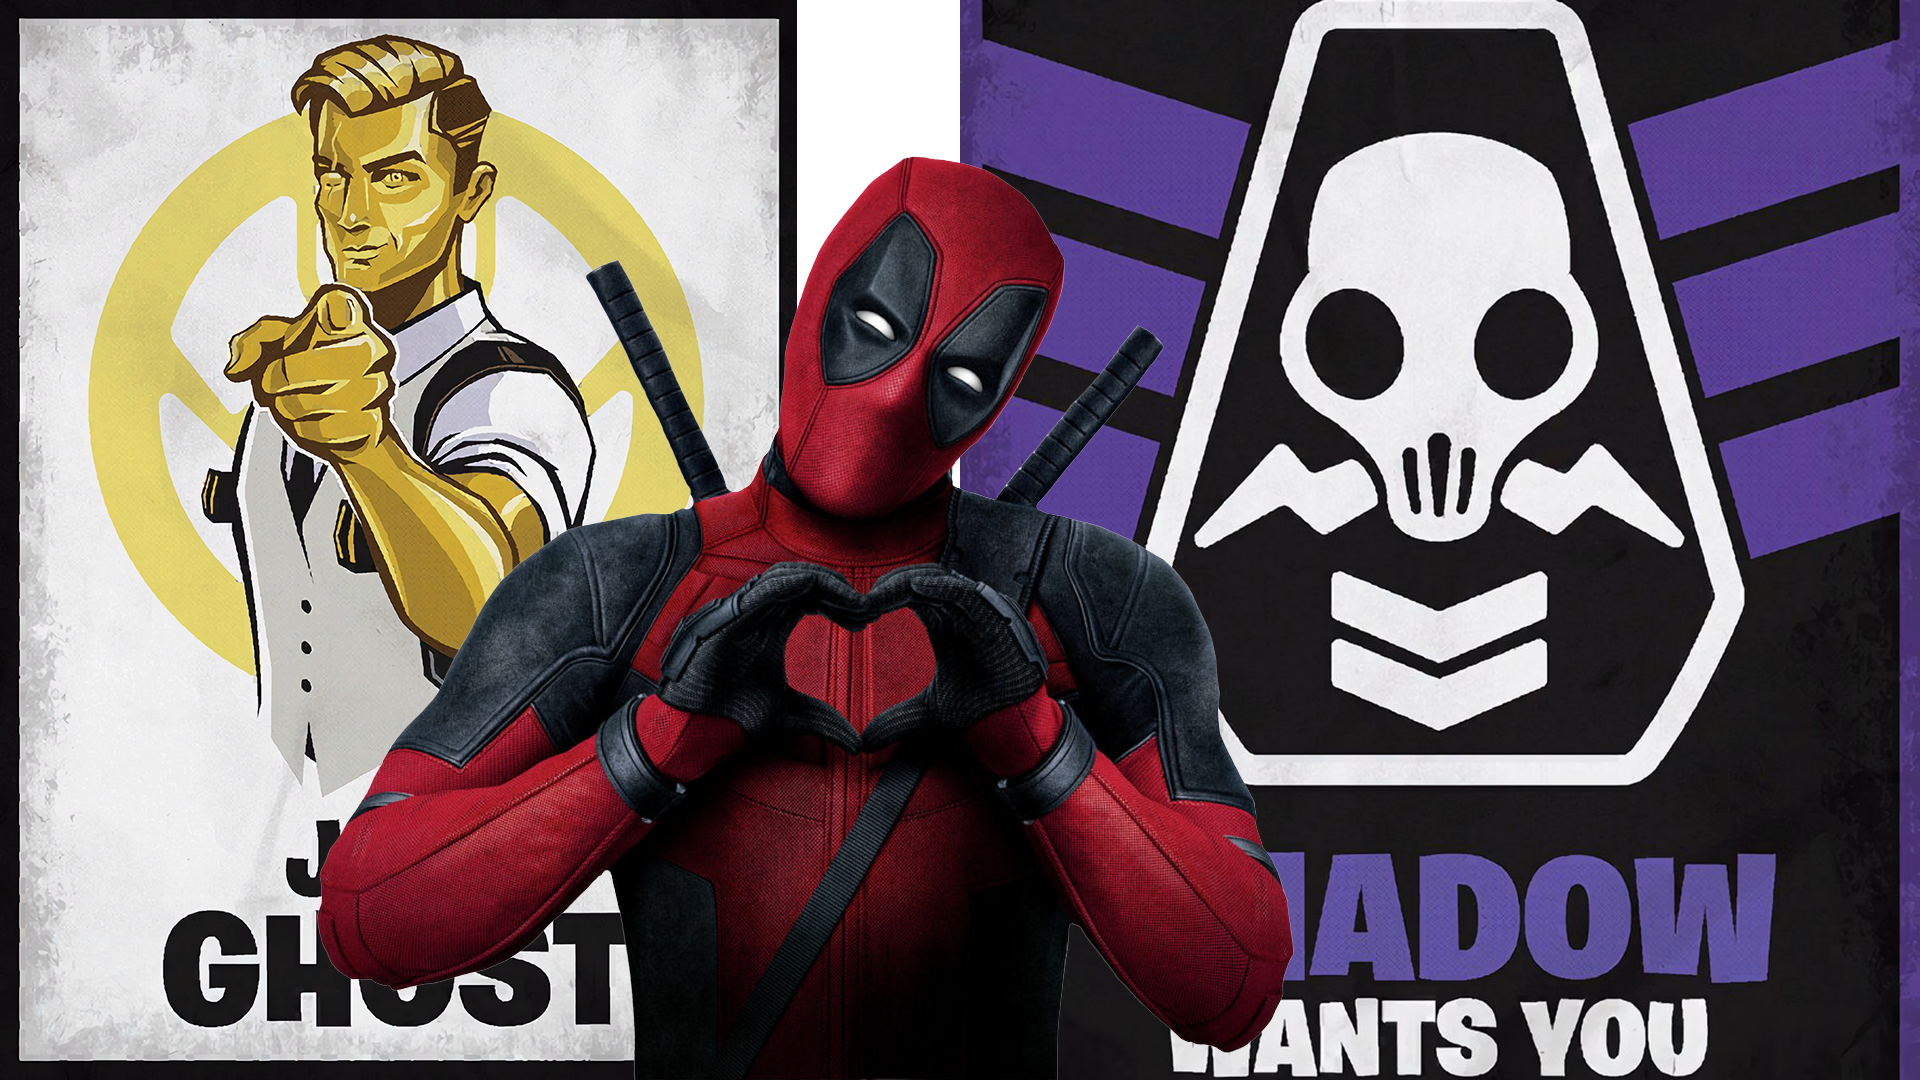 Fortnite Deadpool challenges: Where to deface posters and find big